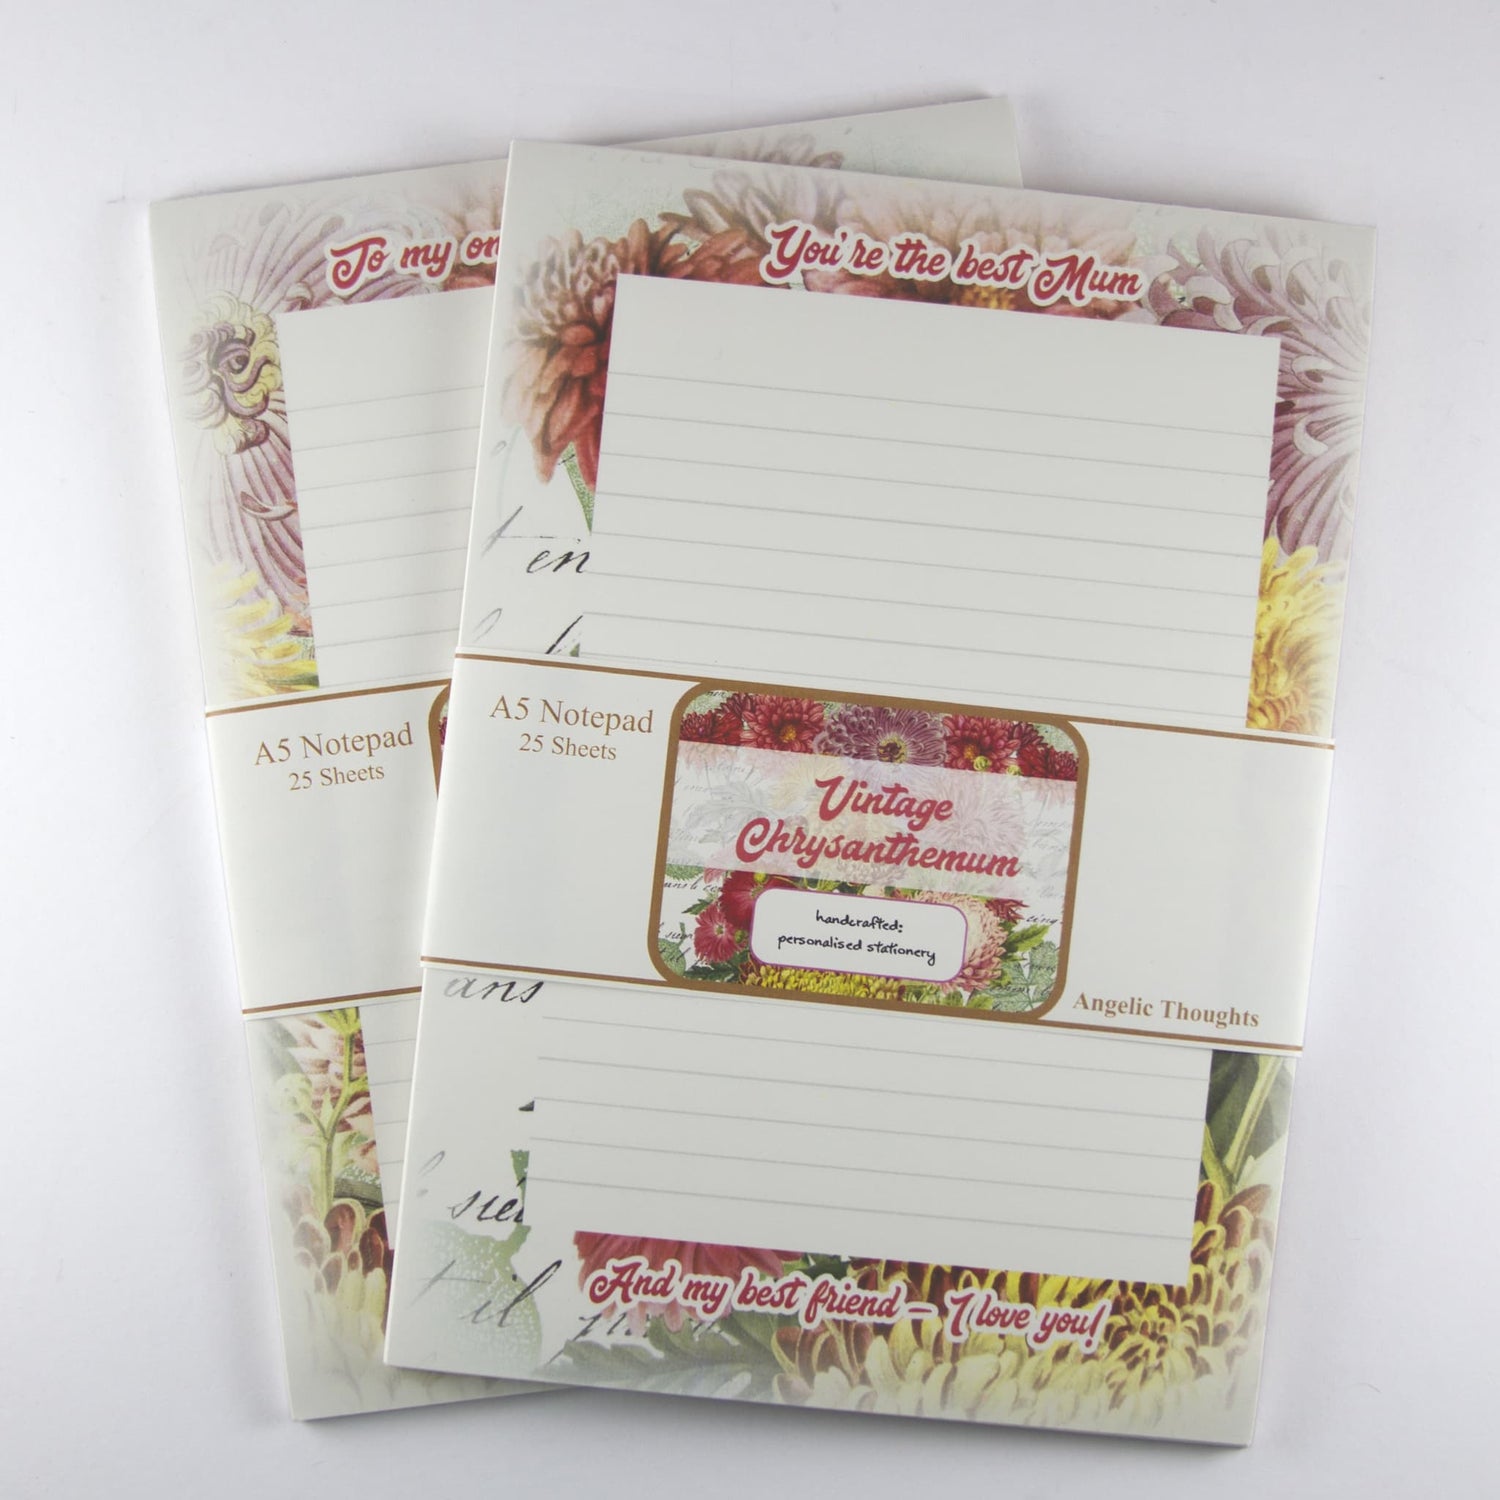 Personalised A5 Compendium - Vintage Chrysanthemum (2 pack A5 Notepads incl.)